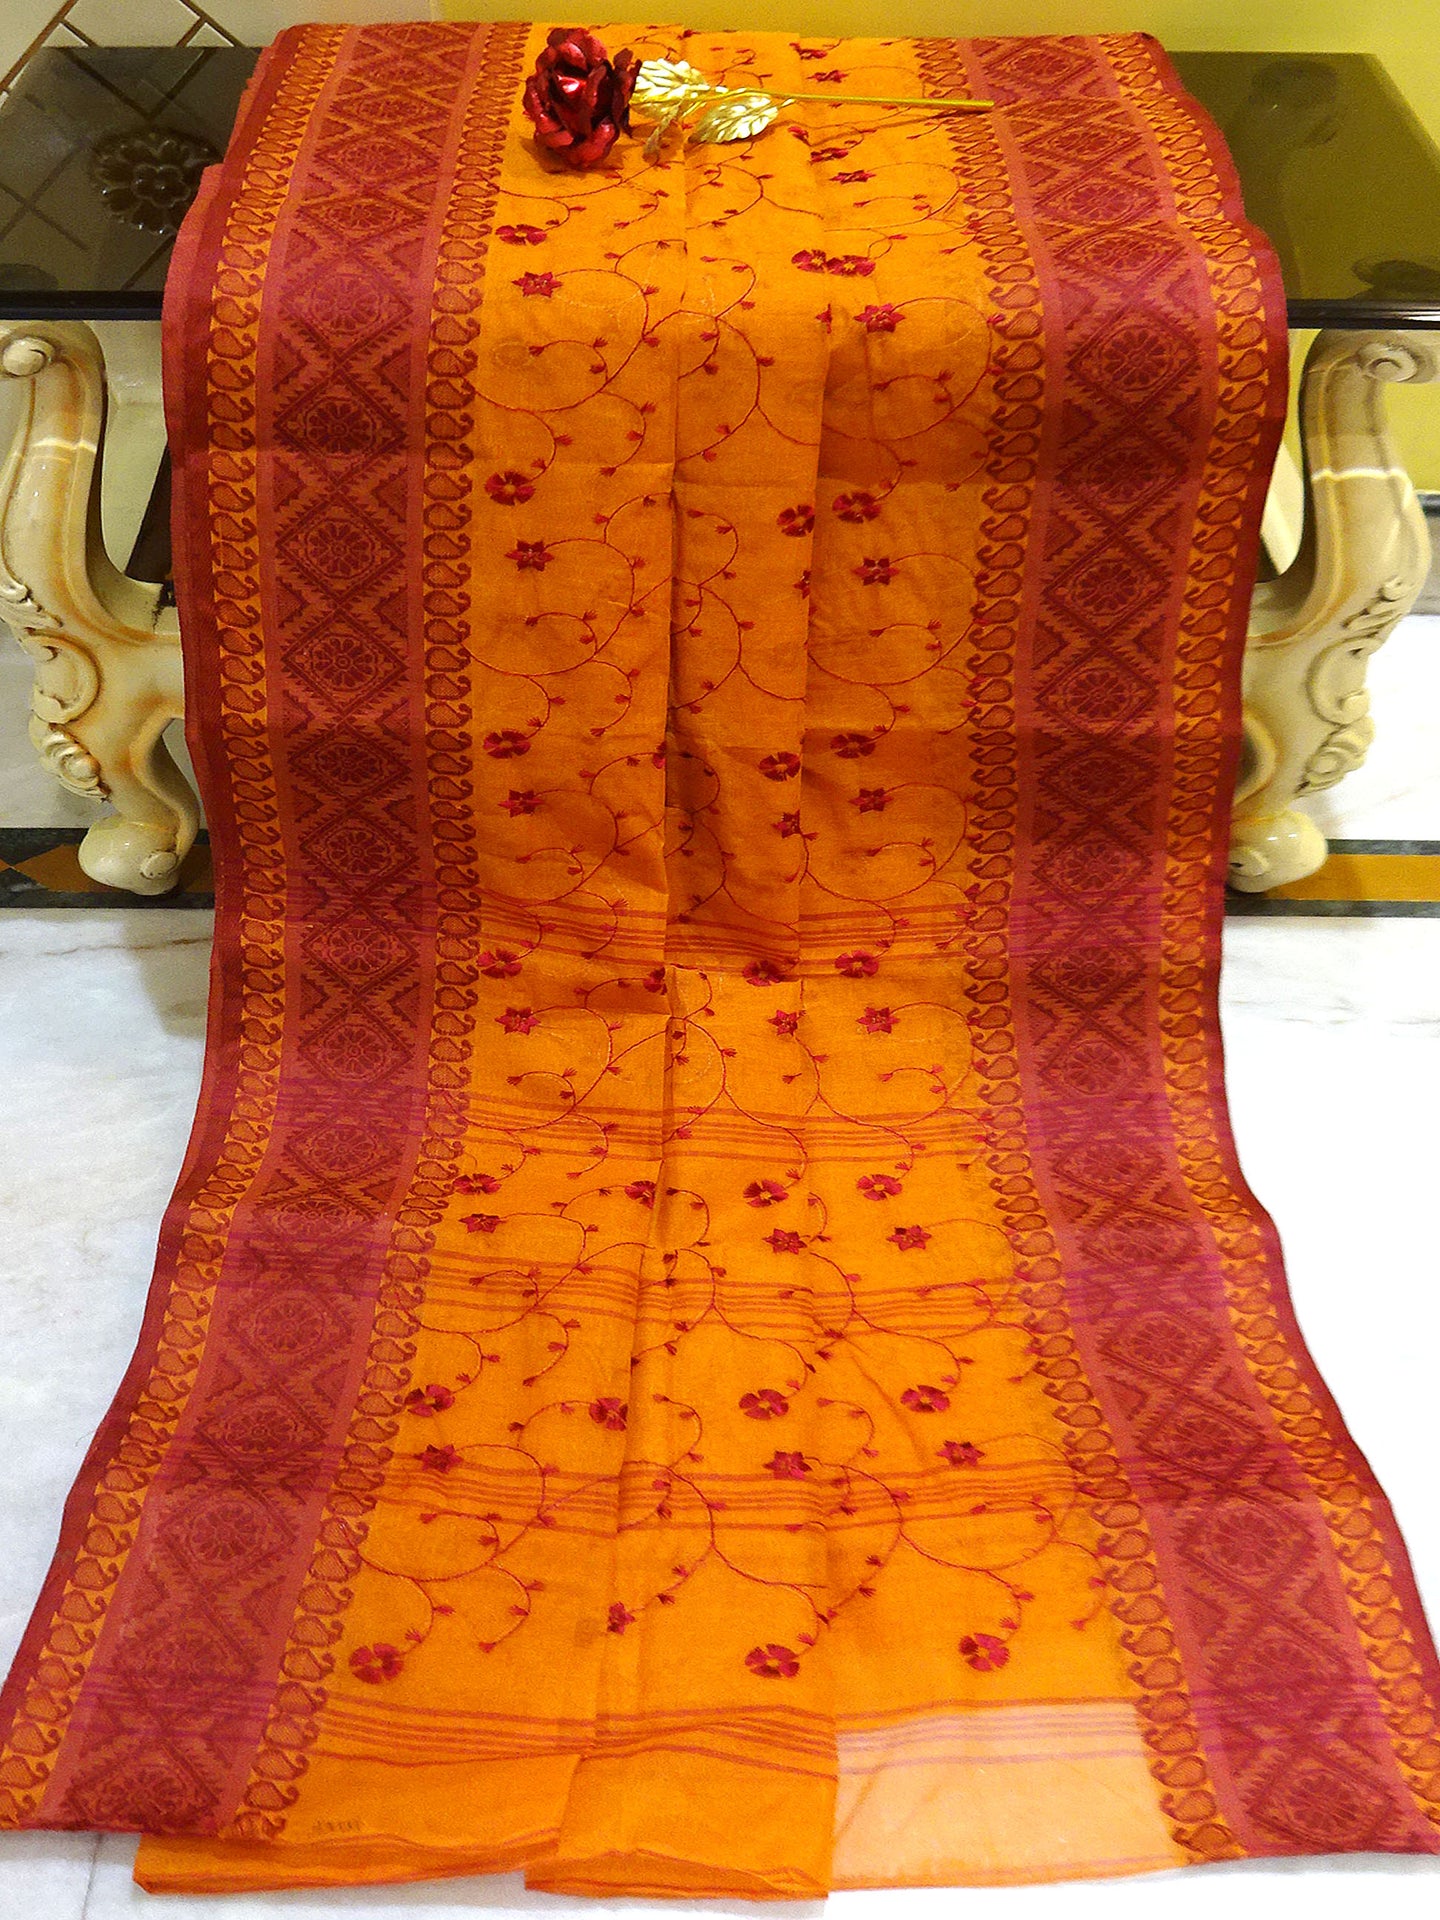 Bengal Handloom Cotton Saree with Floral Jaal Embroidery Work in Mustard Brown and Maroon